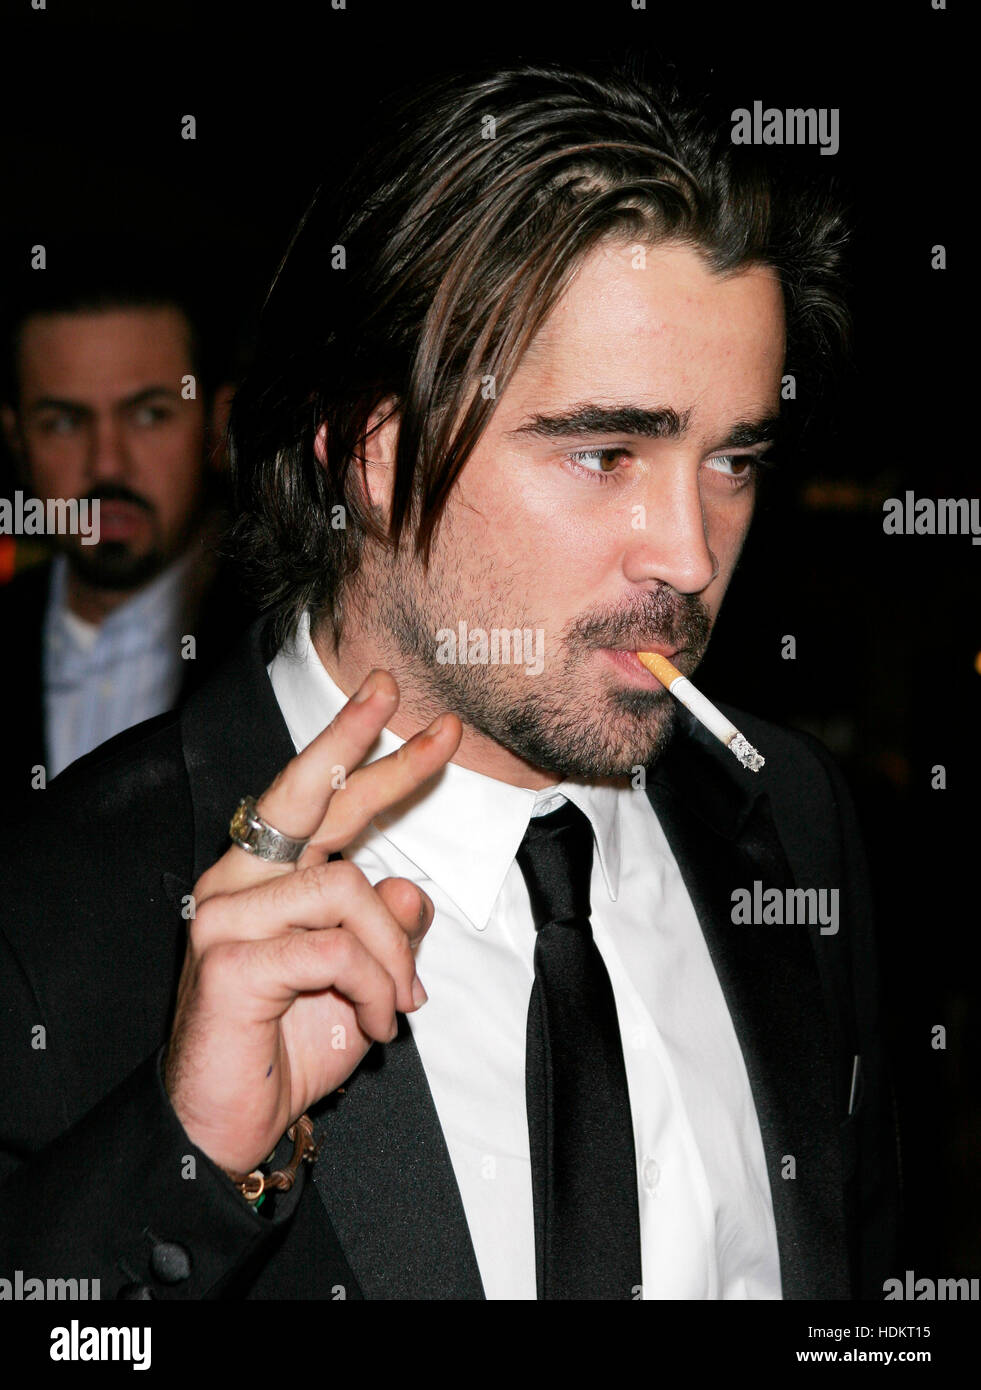 Colin Farrell at the premiere of the film, 'Alexander'' at Grauman's Chinese Theatre on November 16, 2004 in Los Angeles. Photo credit: Francis Specker Stock Photo